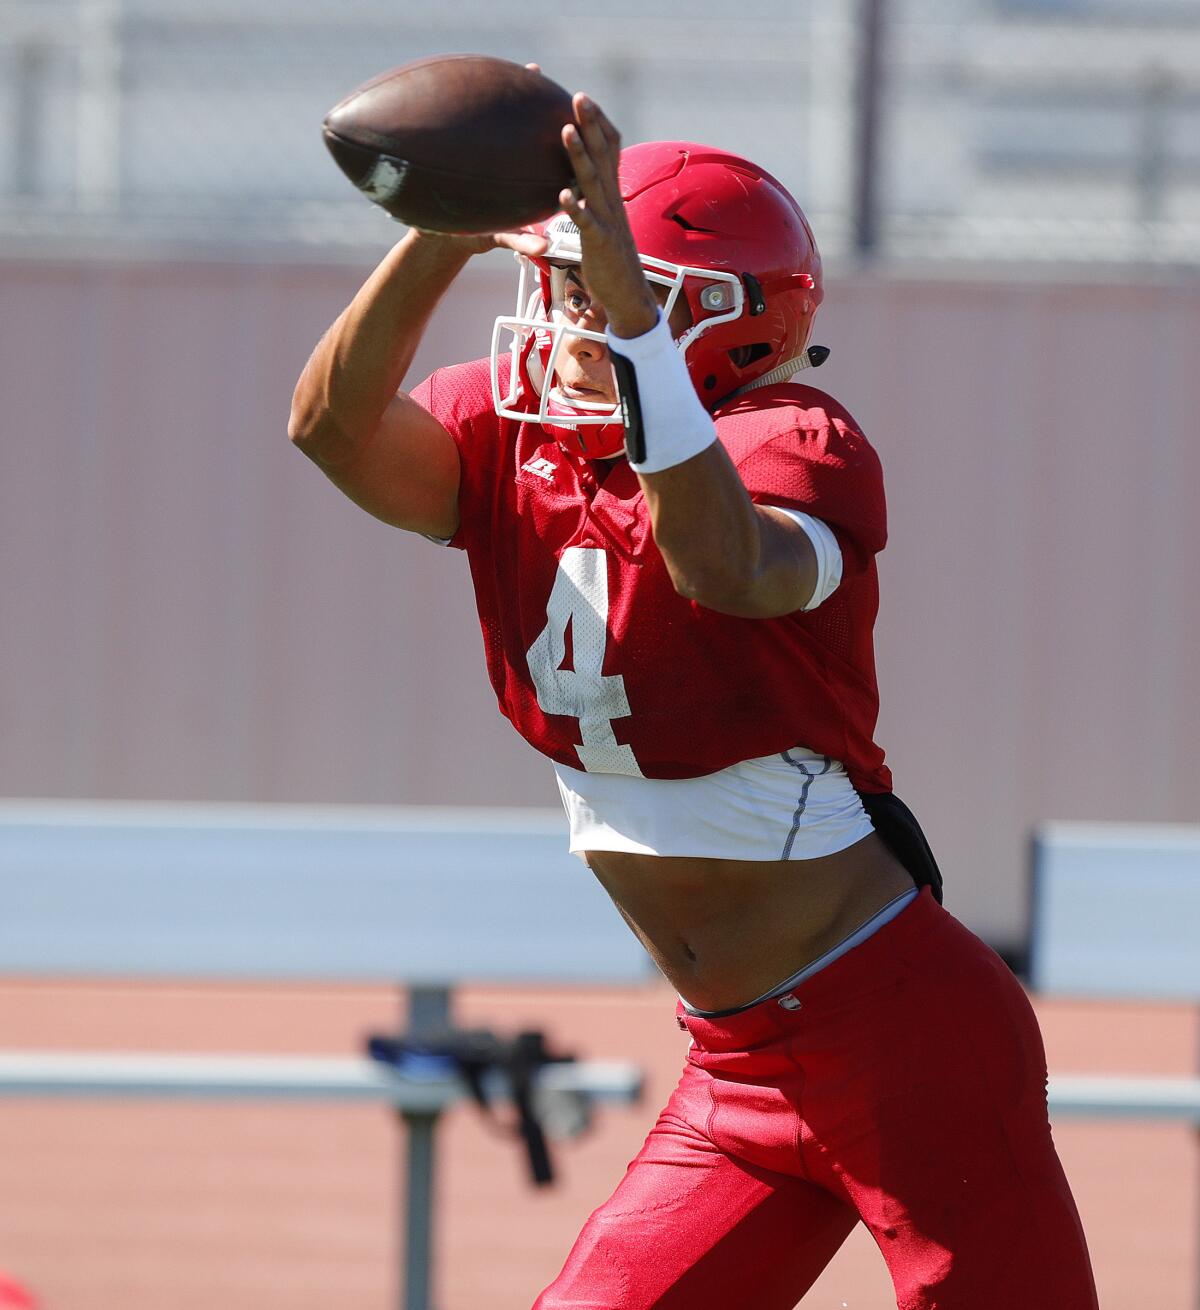 Burroughs' Ellington Simmons reaches up for a catch during a drill at football practice at Burroughs High School in Burbank on Tuesday, August 13, 2019.